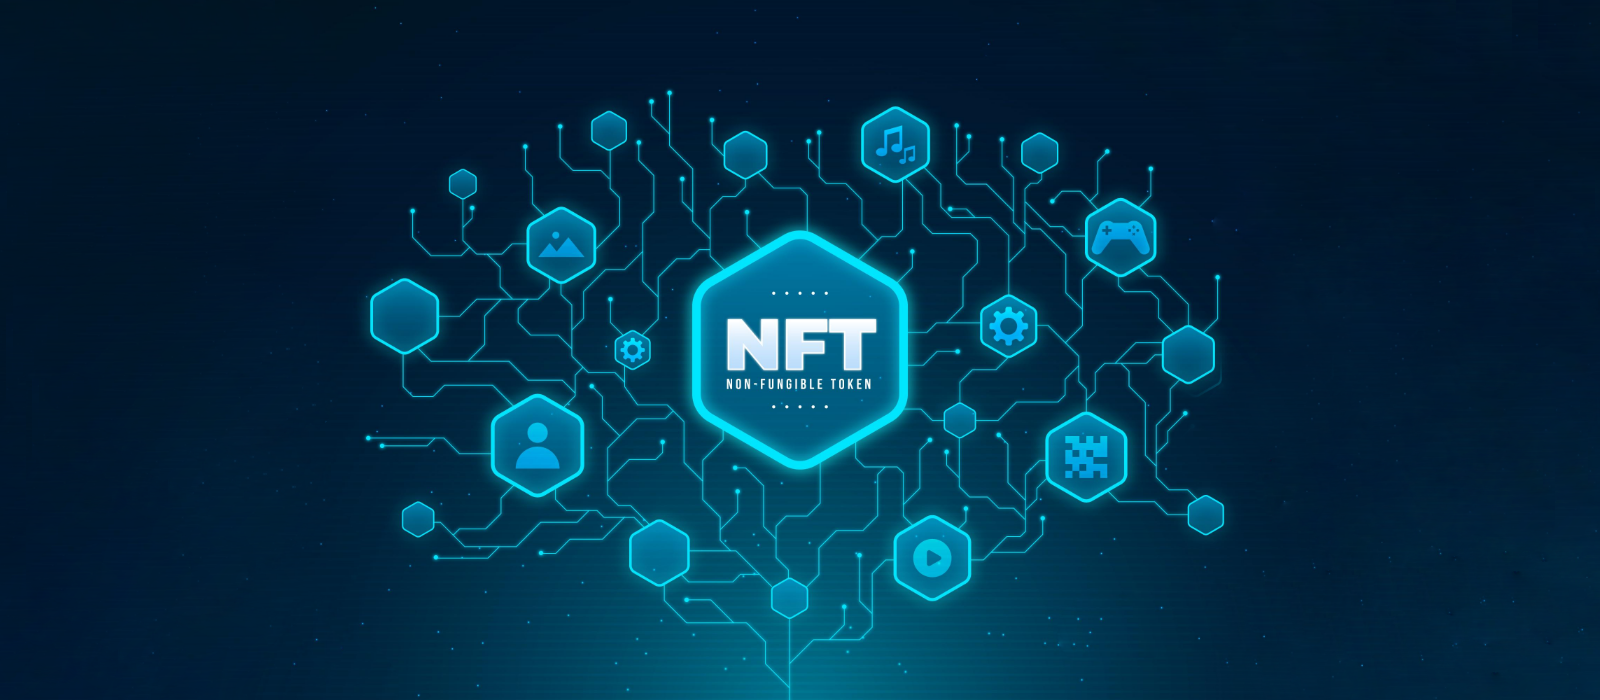 create-your-own-nft-marketplace